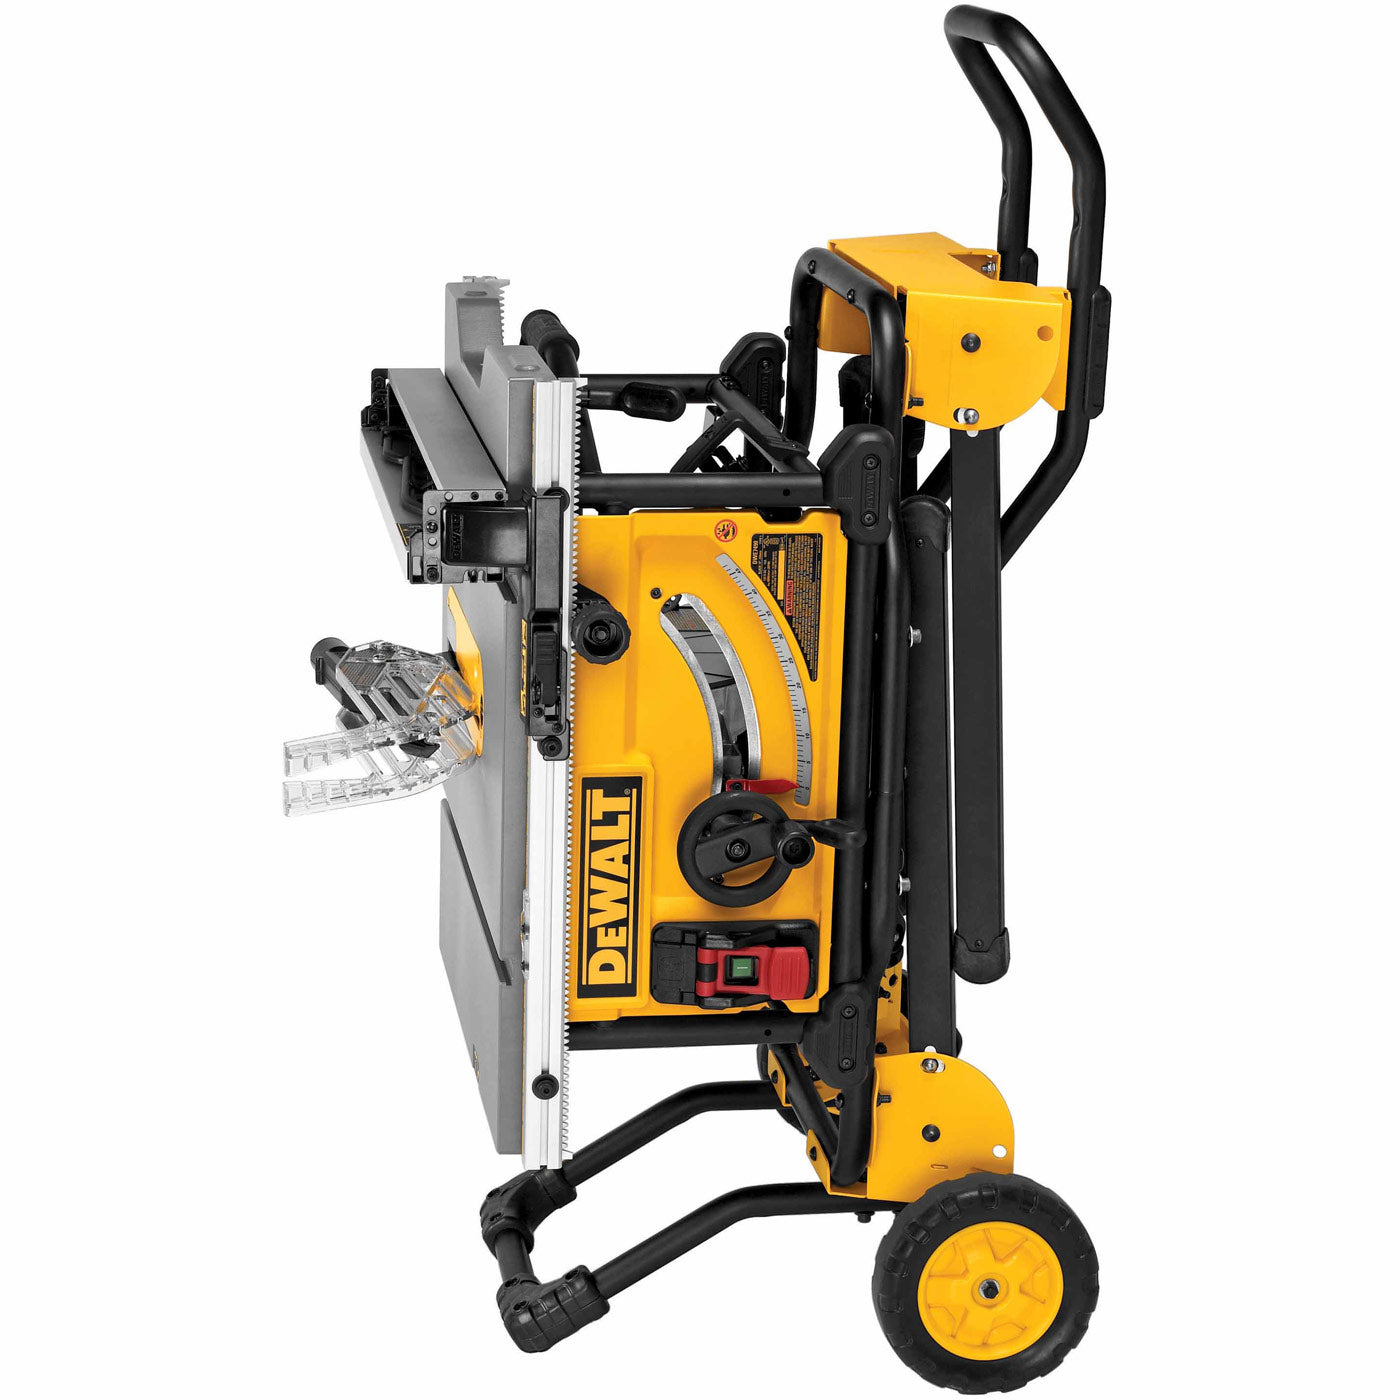 DeWalt DWE7491RS 10" Jobsite Table Saw 32 - 1/2" (82.5cm) Rip Capacity, and a Rolling Stand